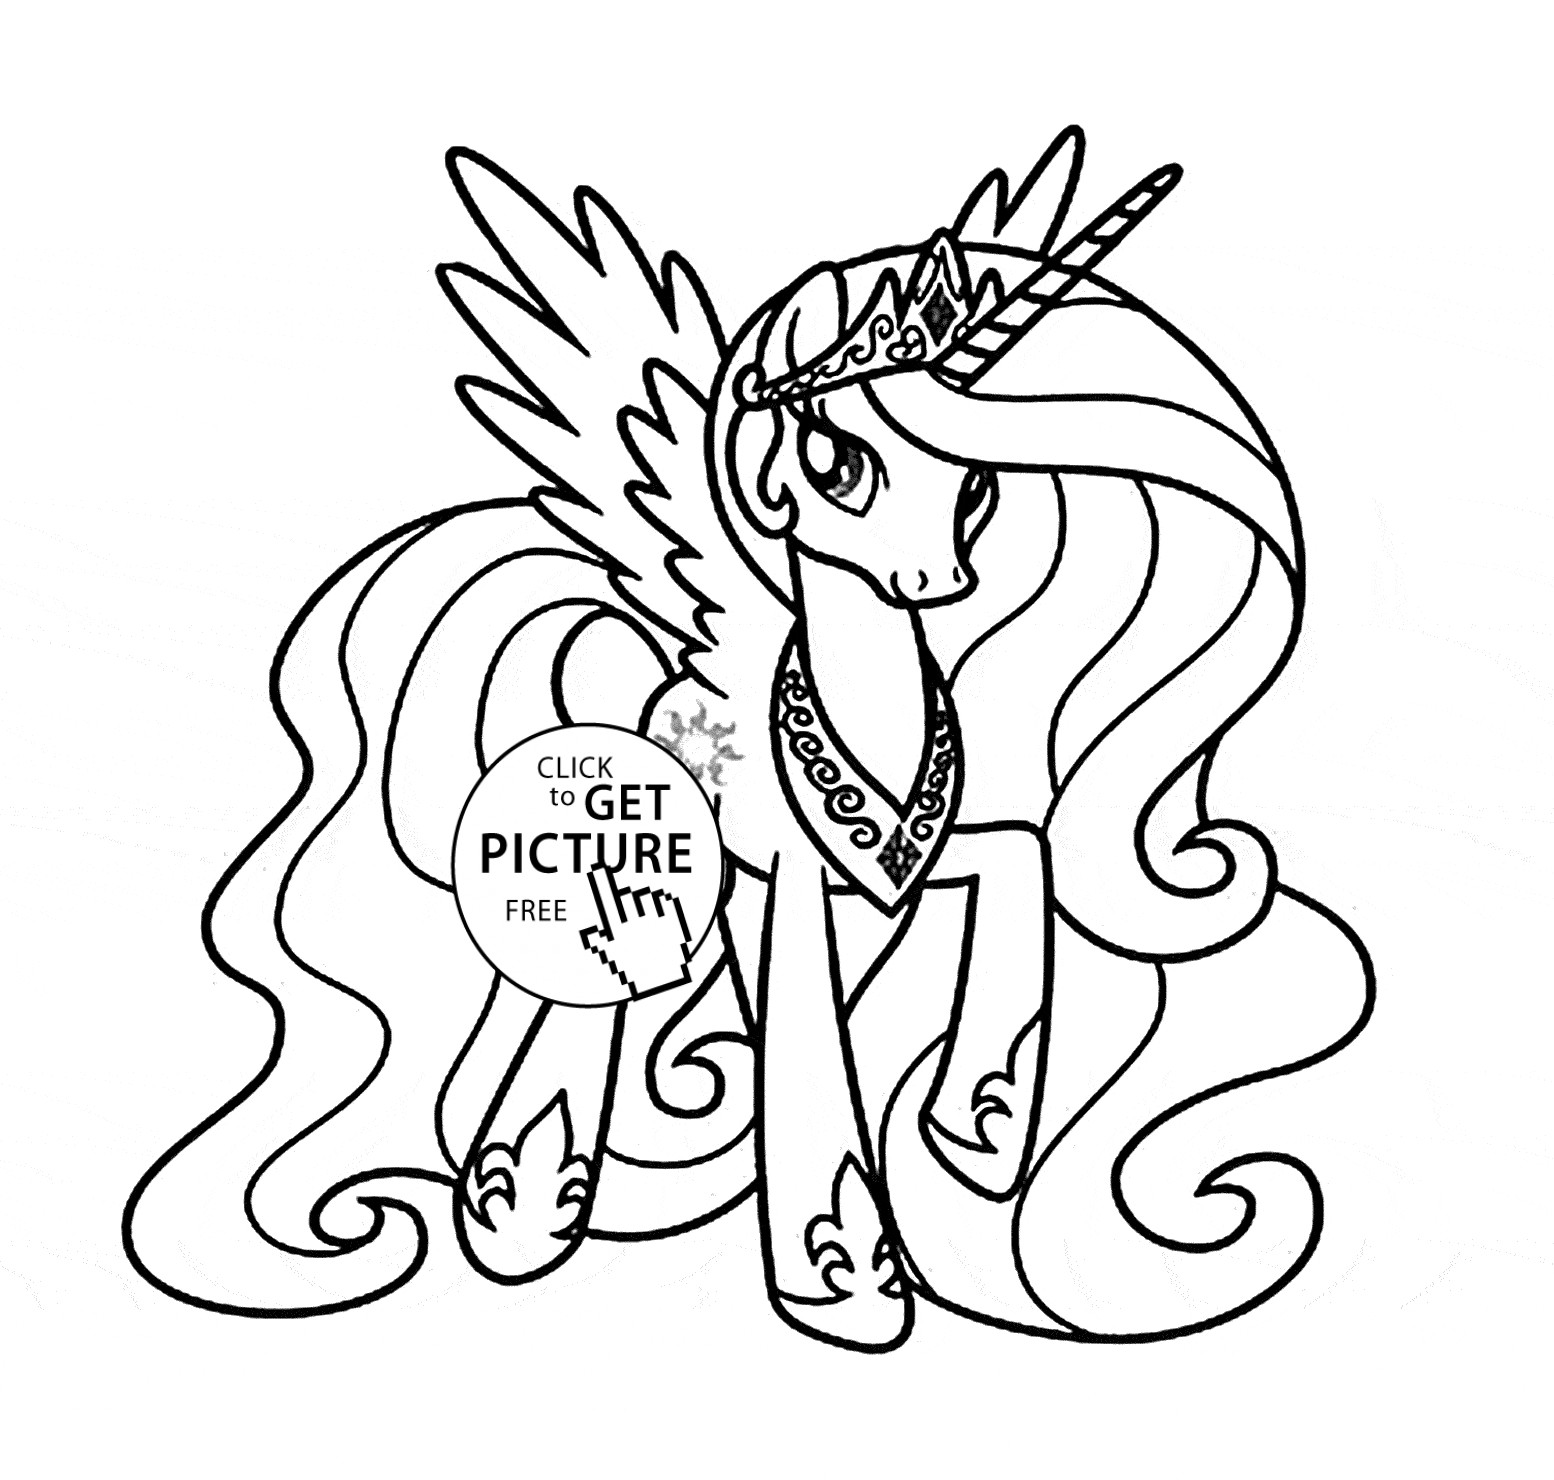 Coloring Pages For Girls Princess Celestia
 Princess Celestia My little pony coloring page for kids